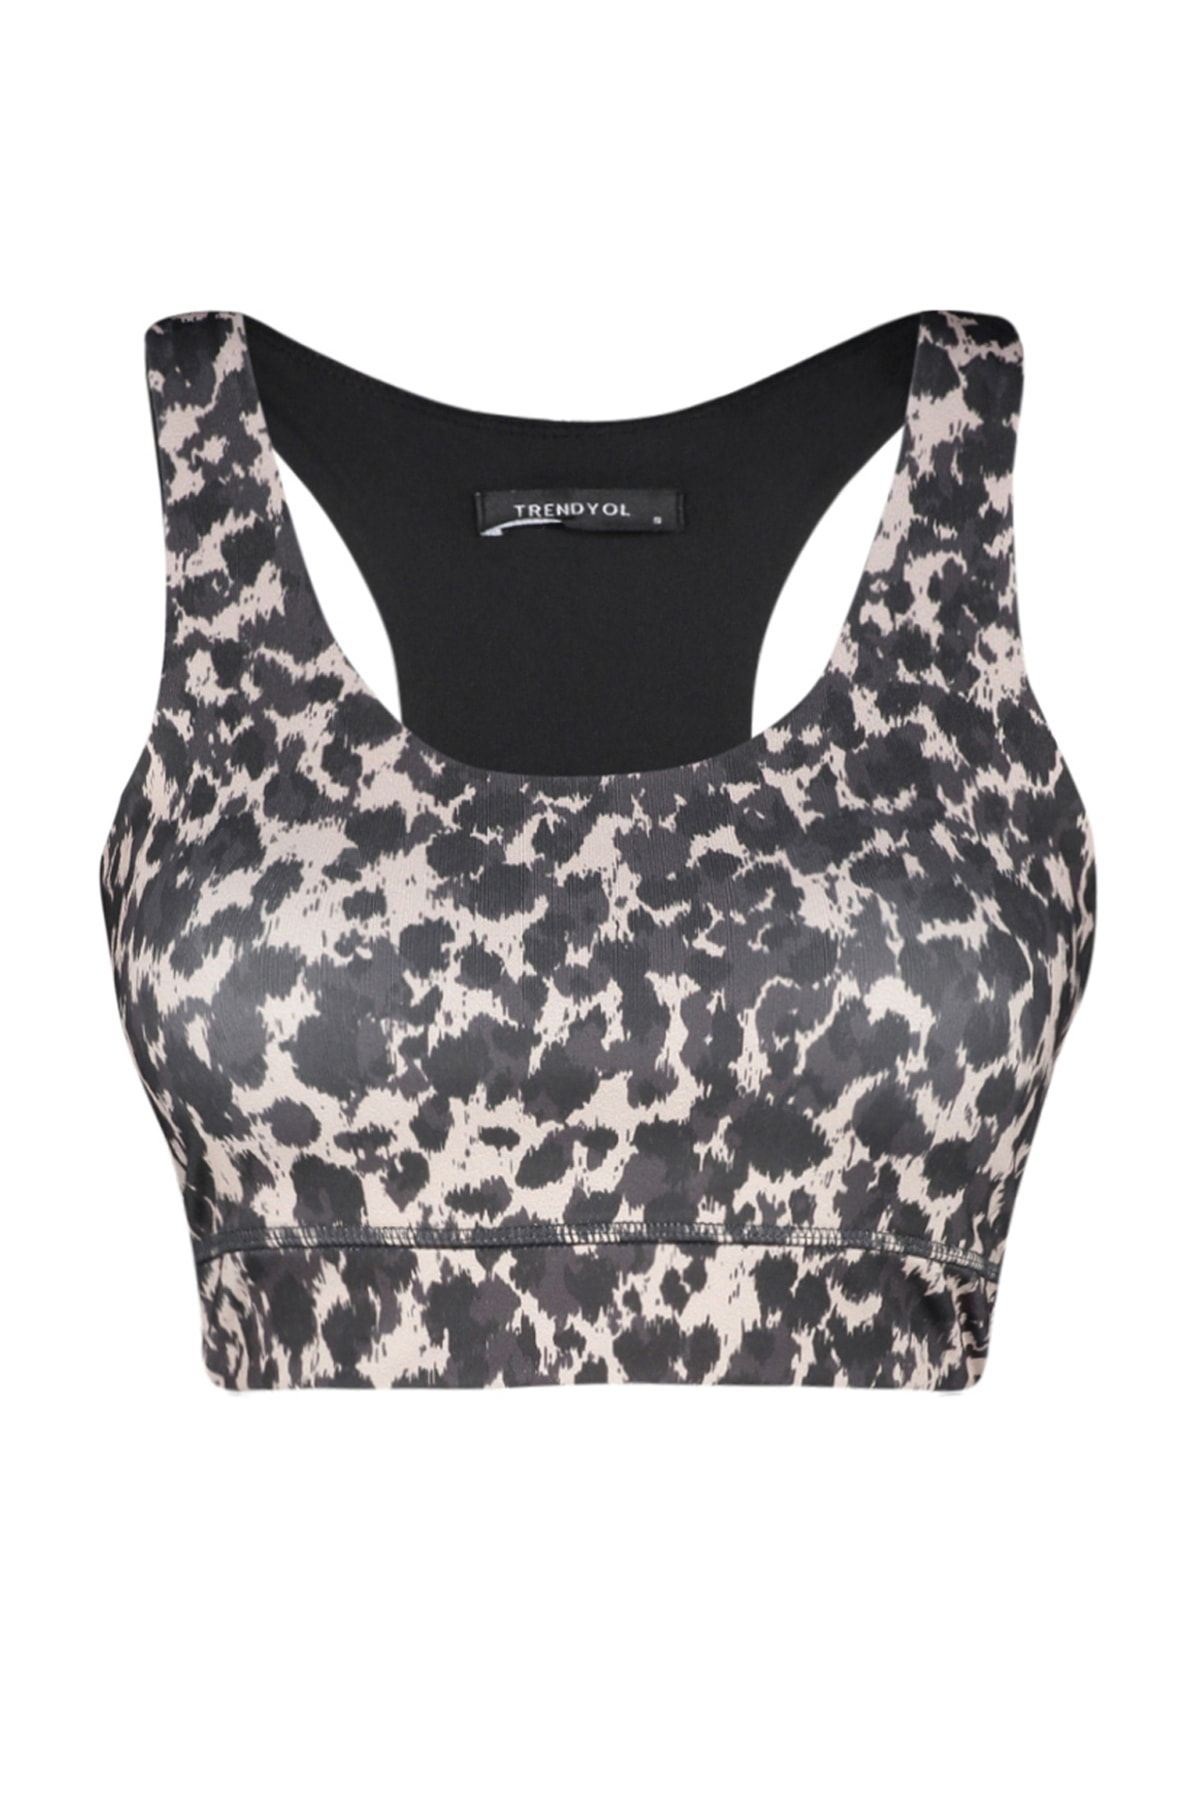 Trendyol Collection Black Medium Support/Shaping Leopard Print